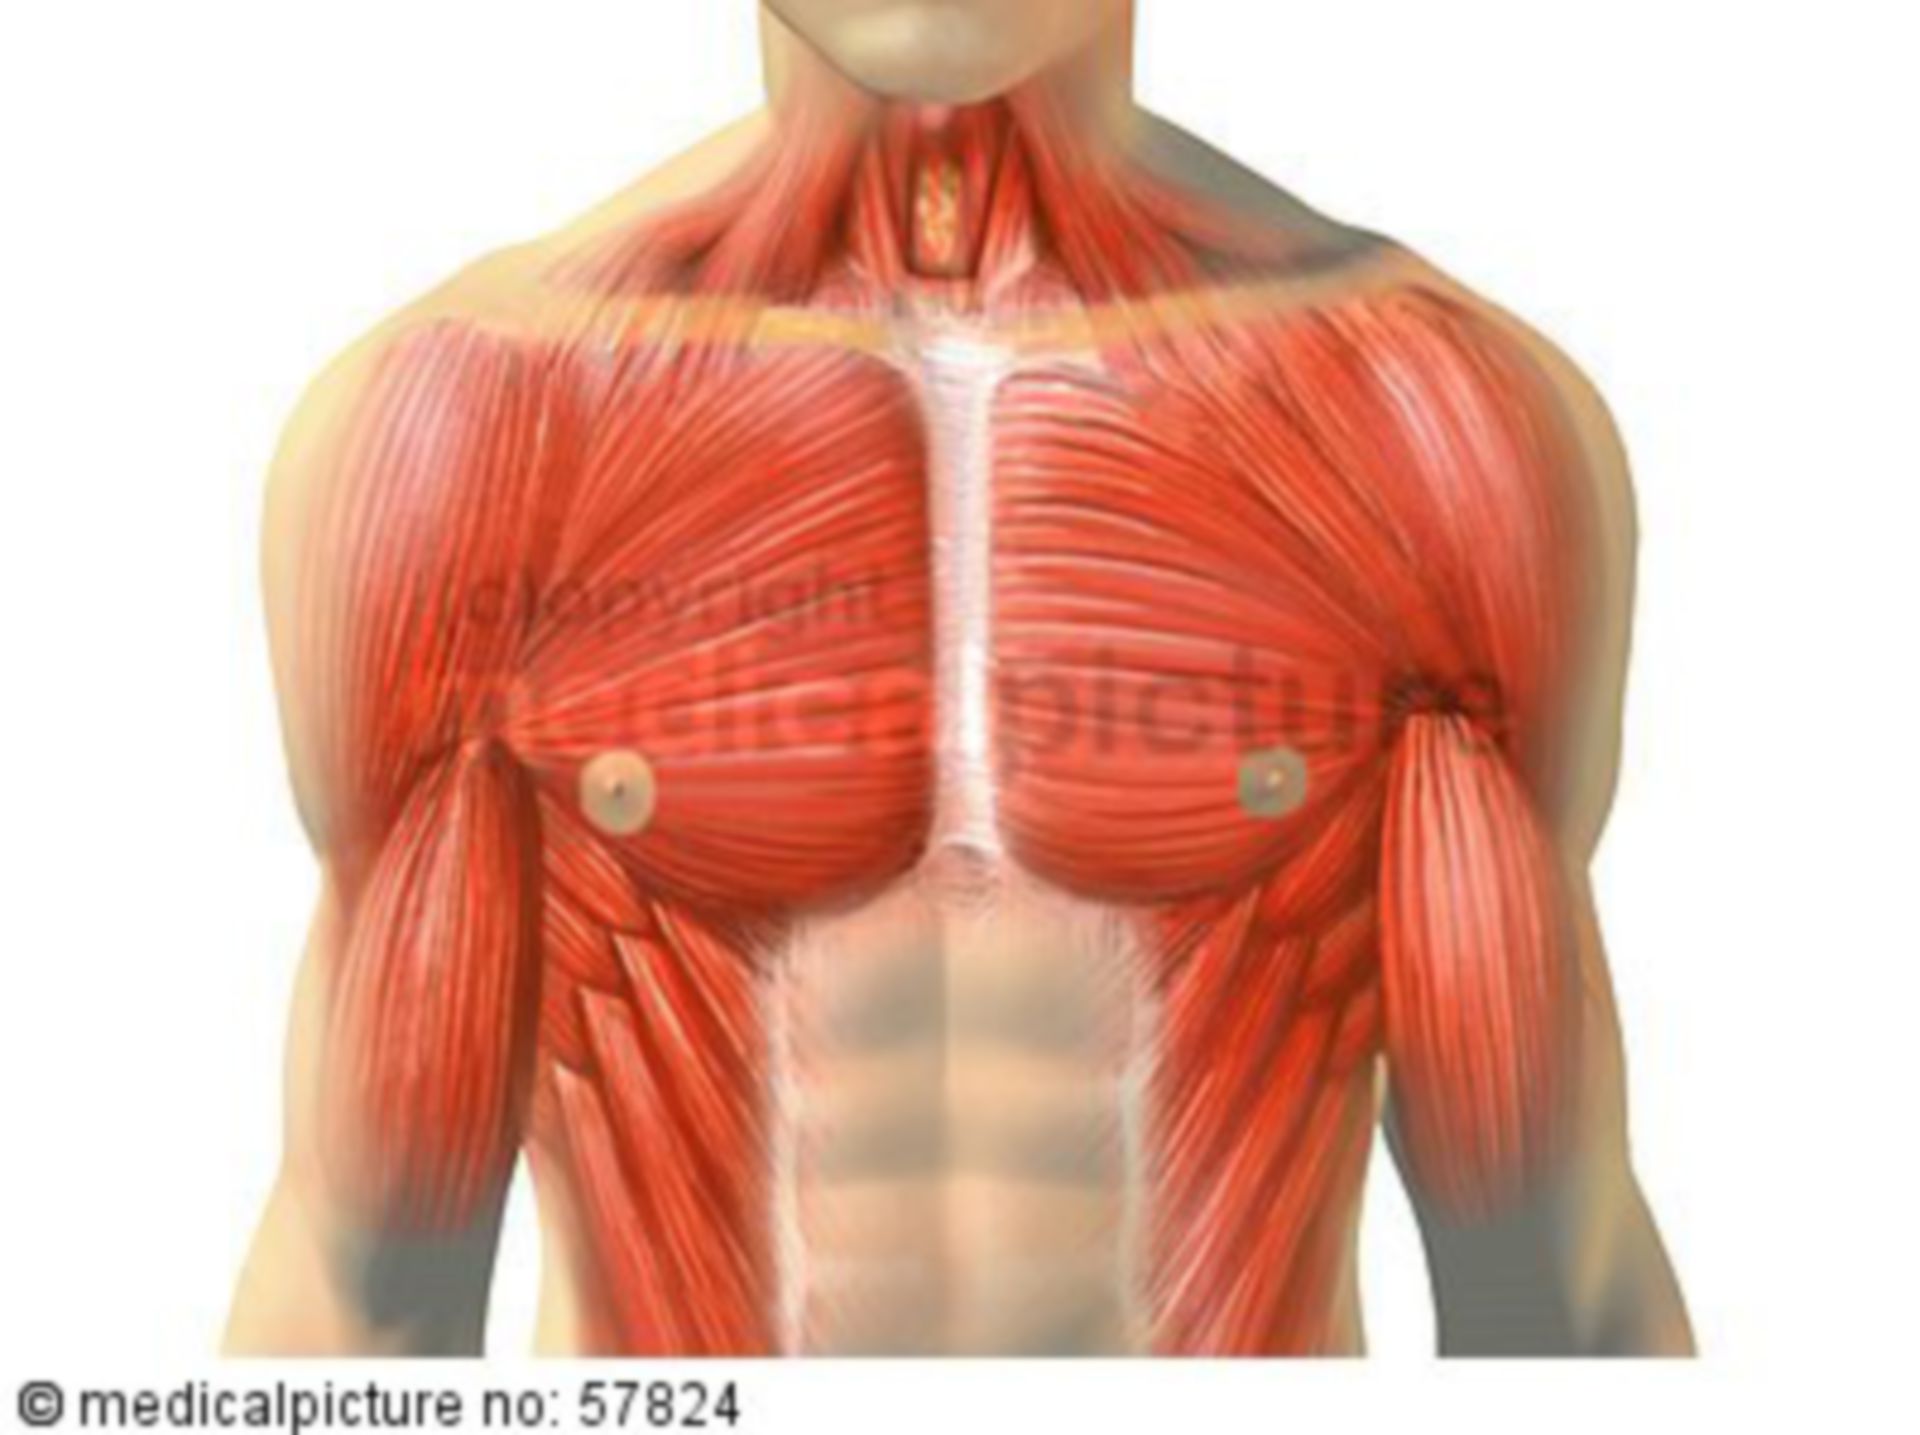 Anatomic illustration - skeletal muscles of the trunk